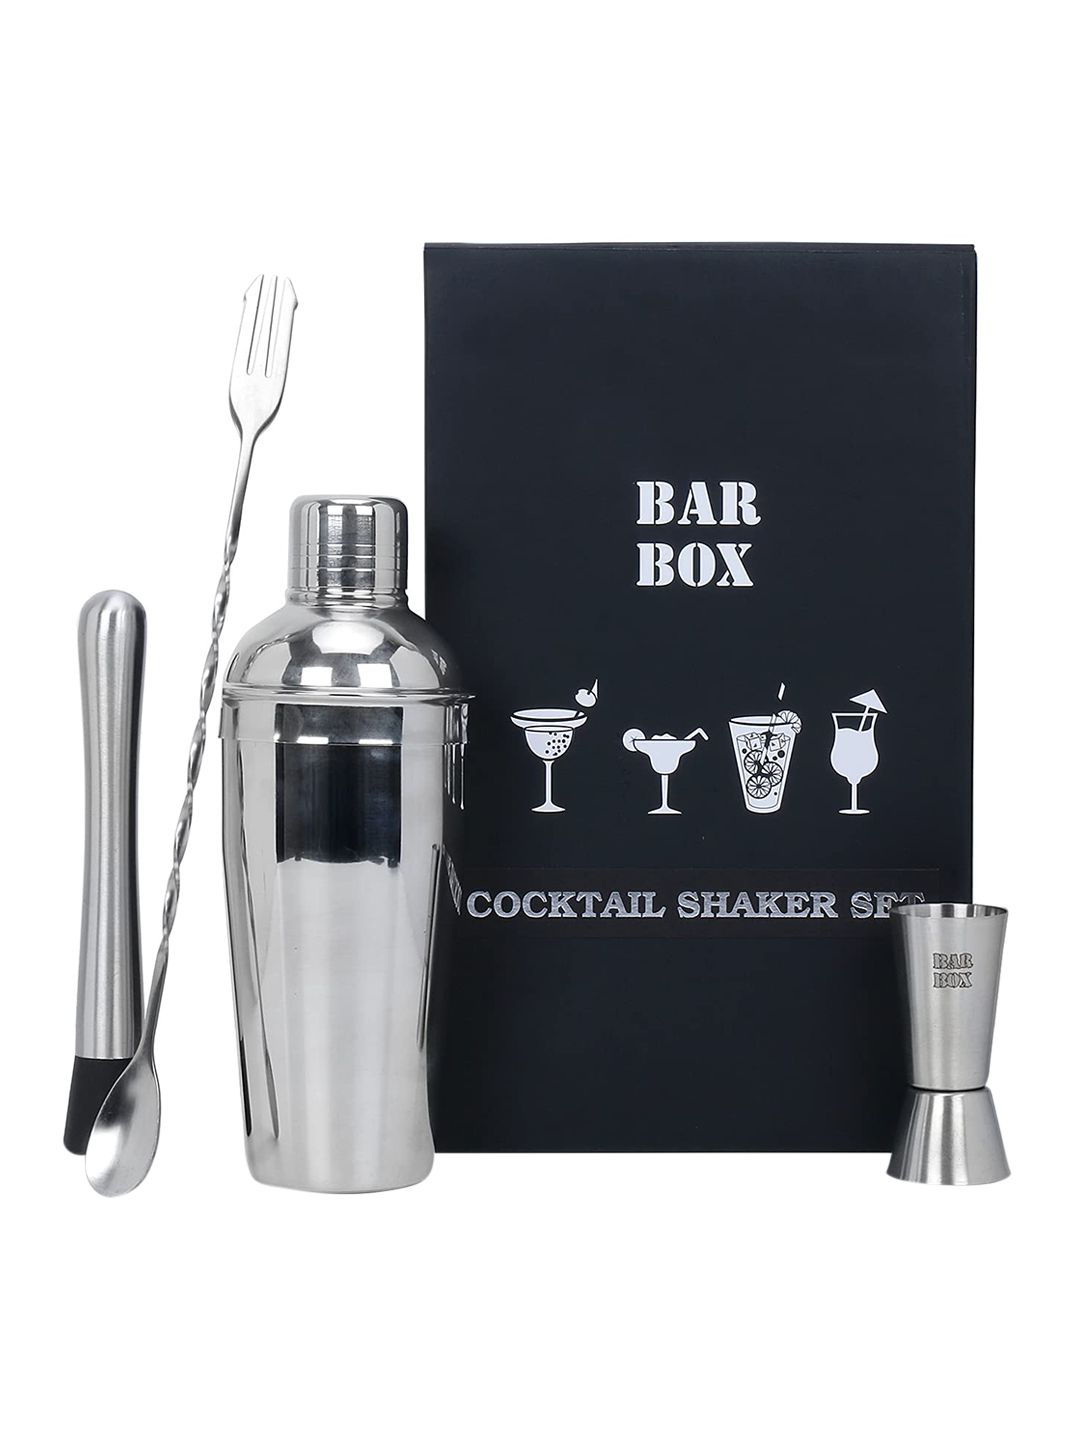 BAR BOX Silver-Toned Solid Set of 5 Cocktail Shaker Price in India